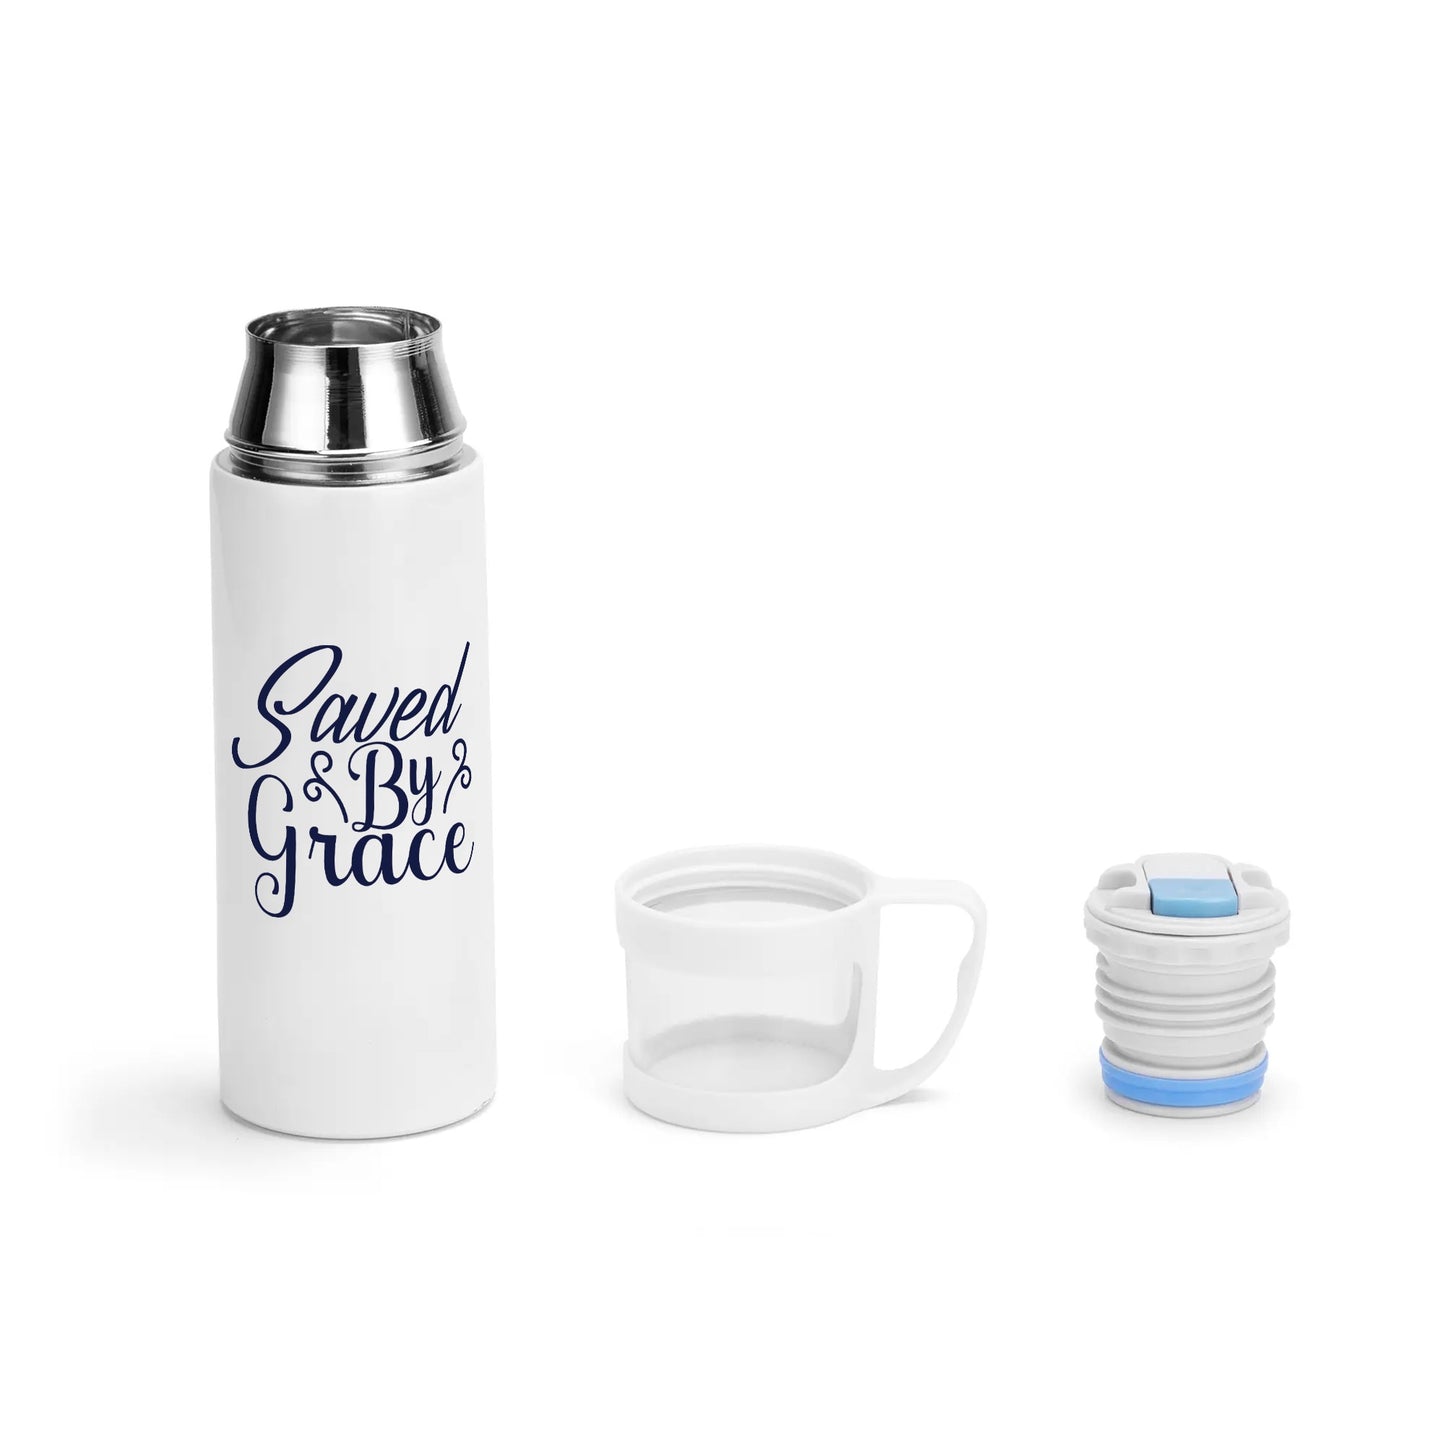 Saved By Grace Christian Vacuum Bottle with Cup popcustoms